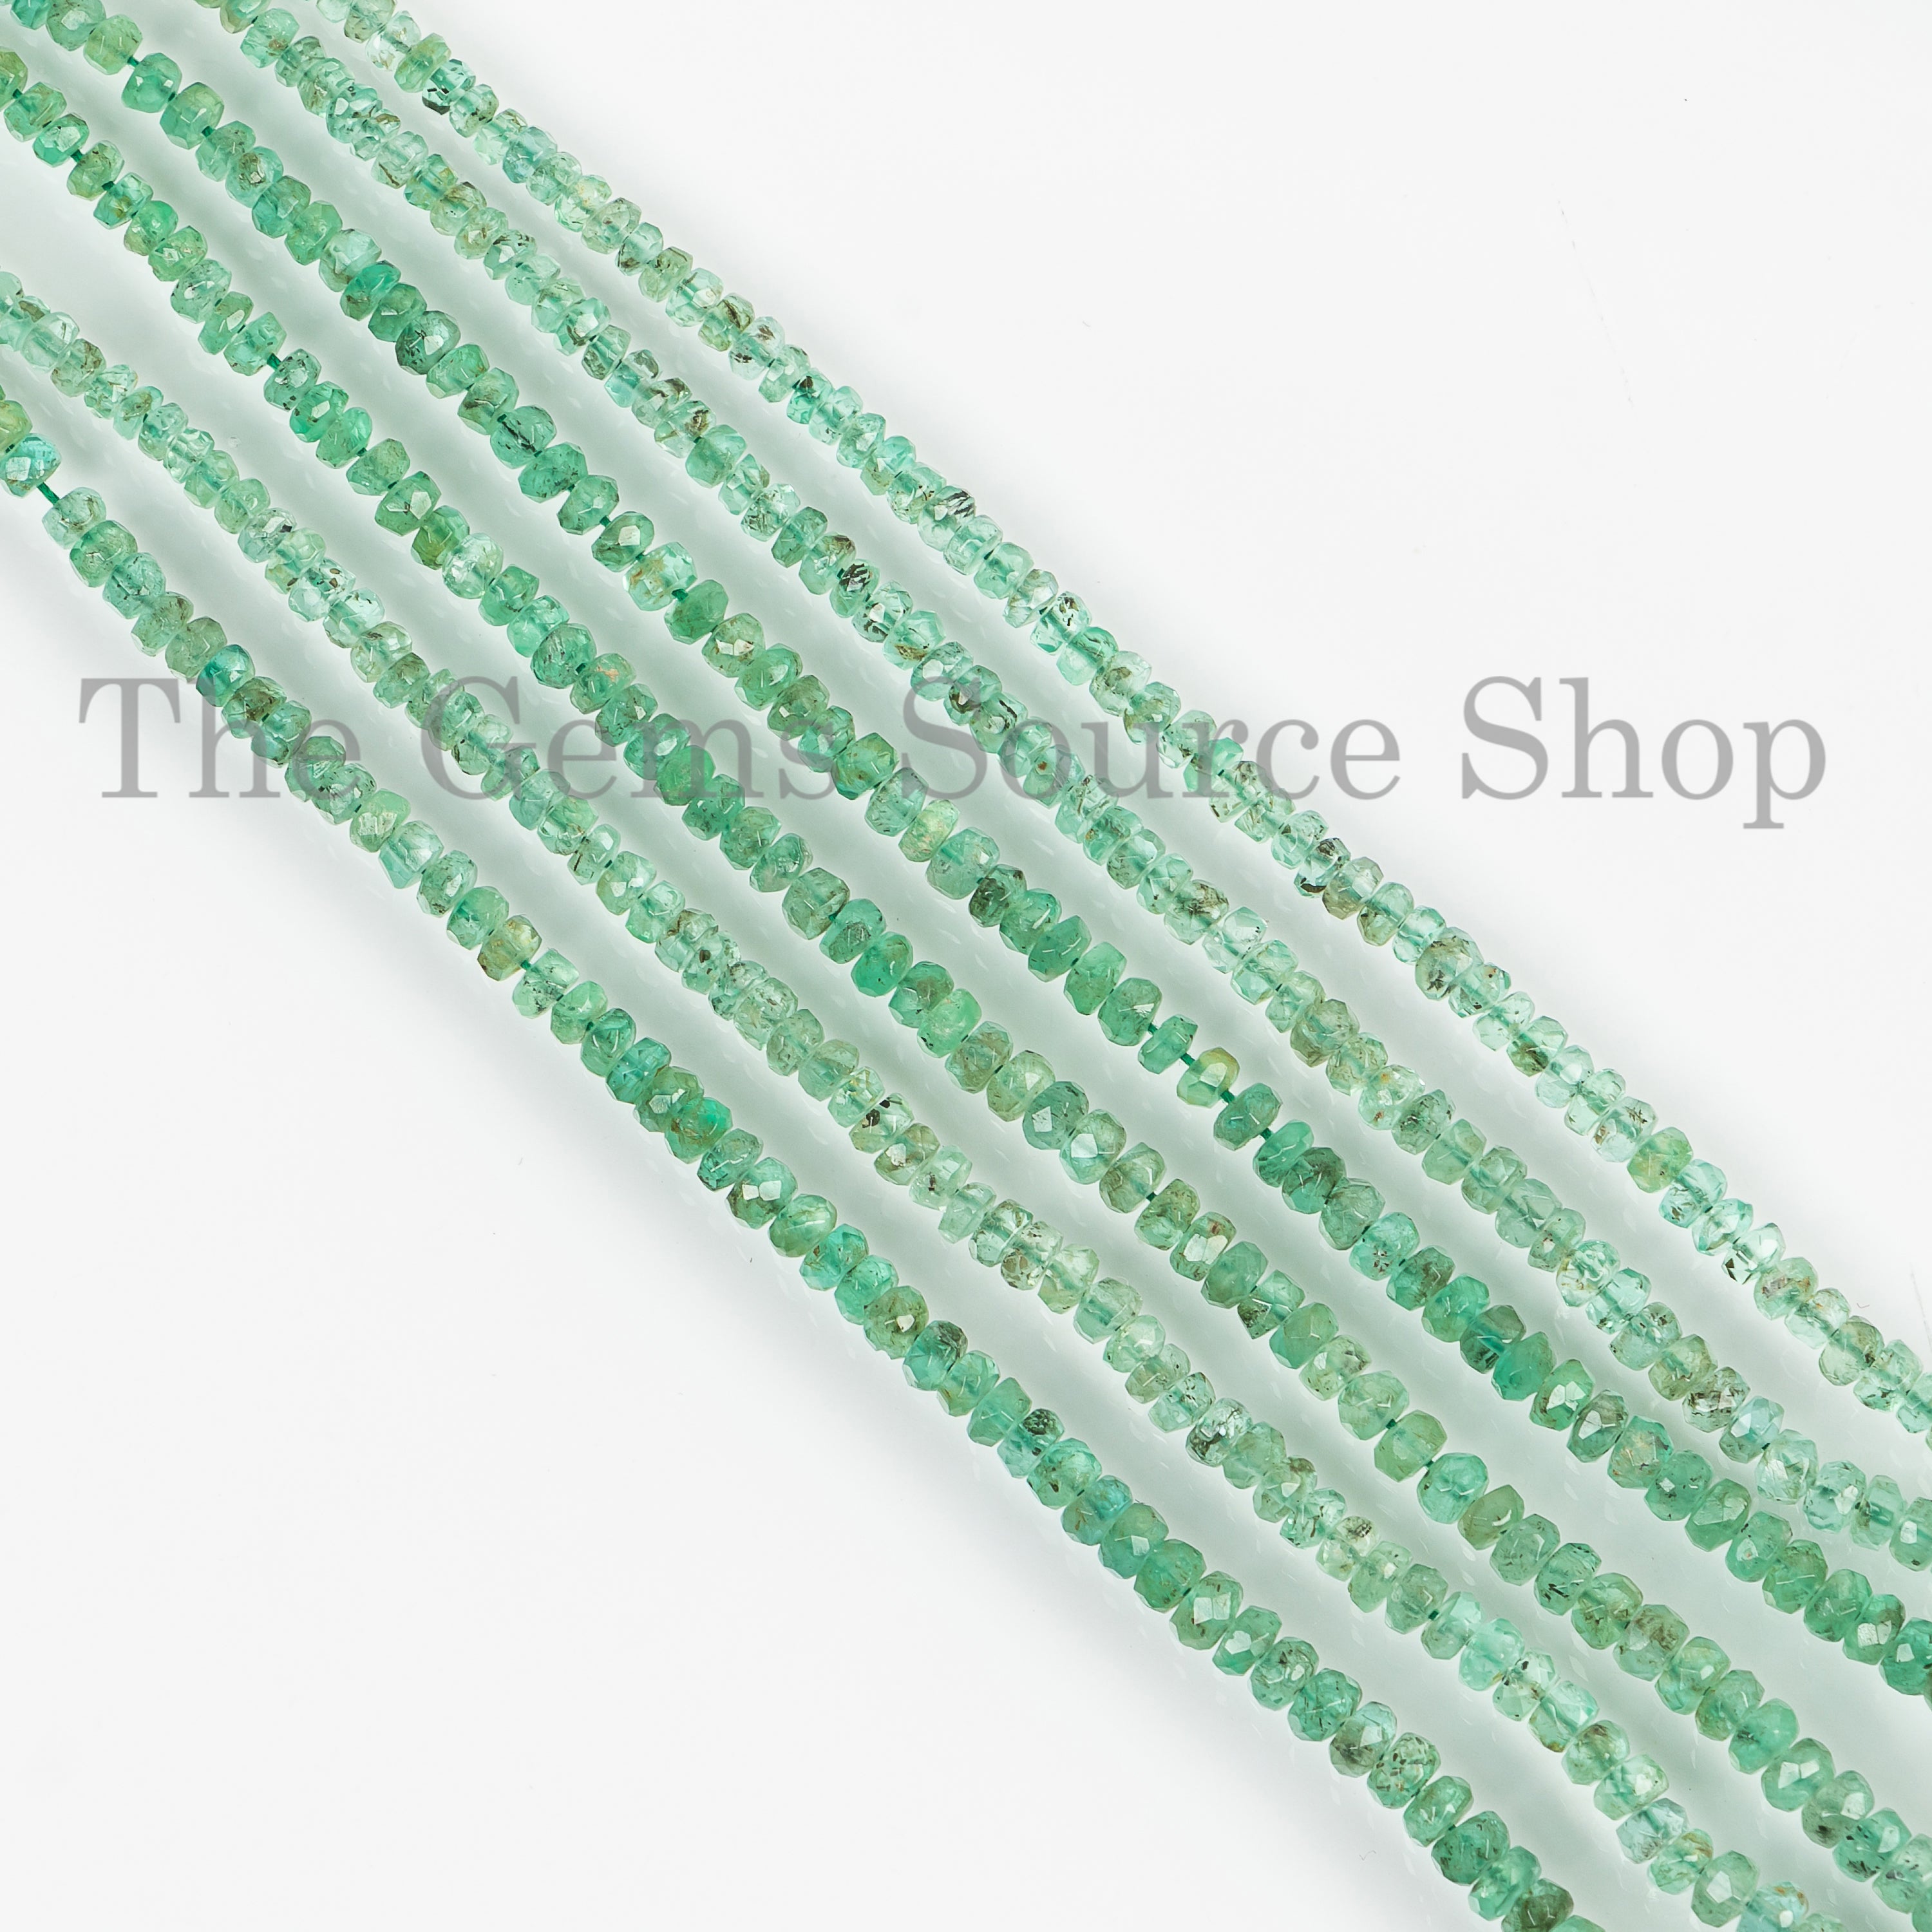 Natural Emerald Beads, 2.5-4 mm Emerald Rondelle Beads, Emerald Faceted Beads, Emerald Rondelle Gemstone Beads, Emerald Jewelry Making Beads